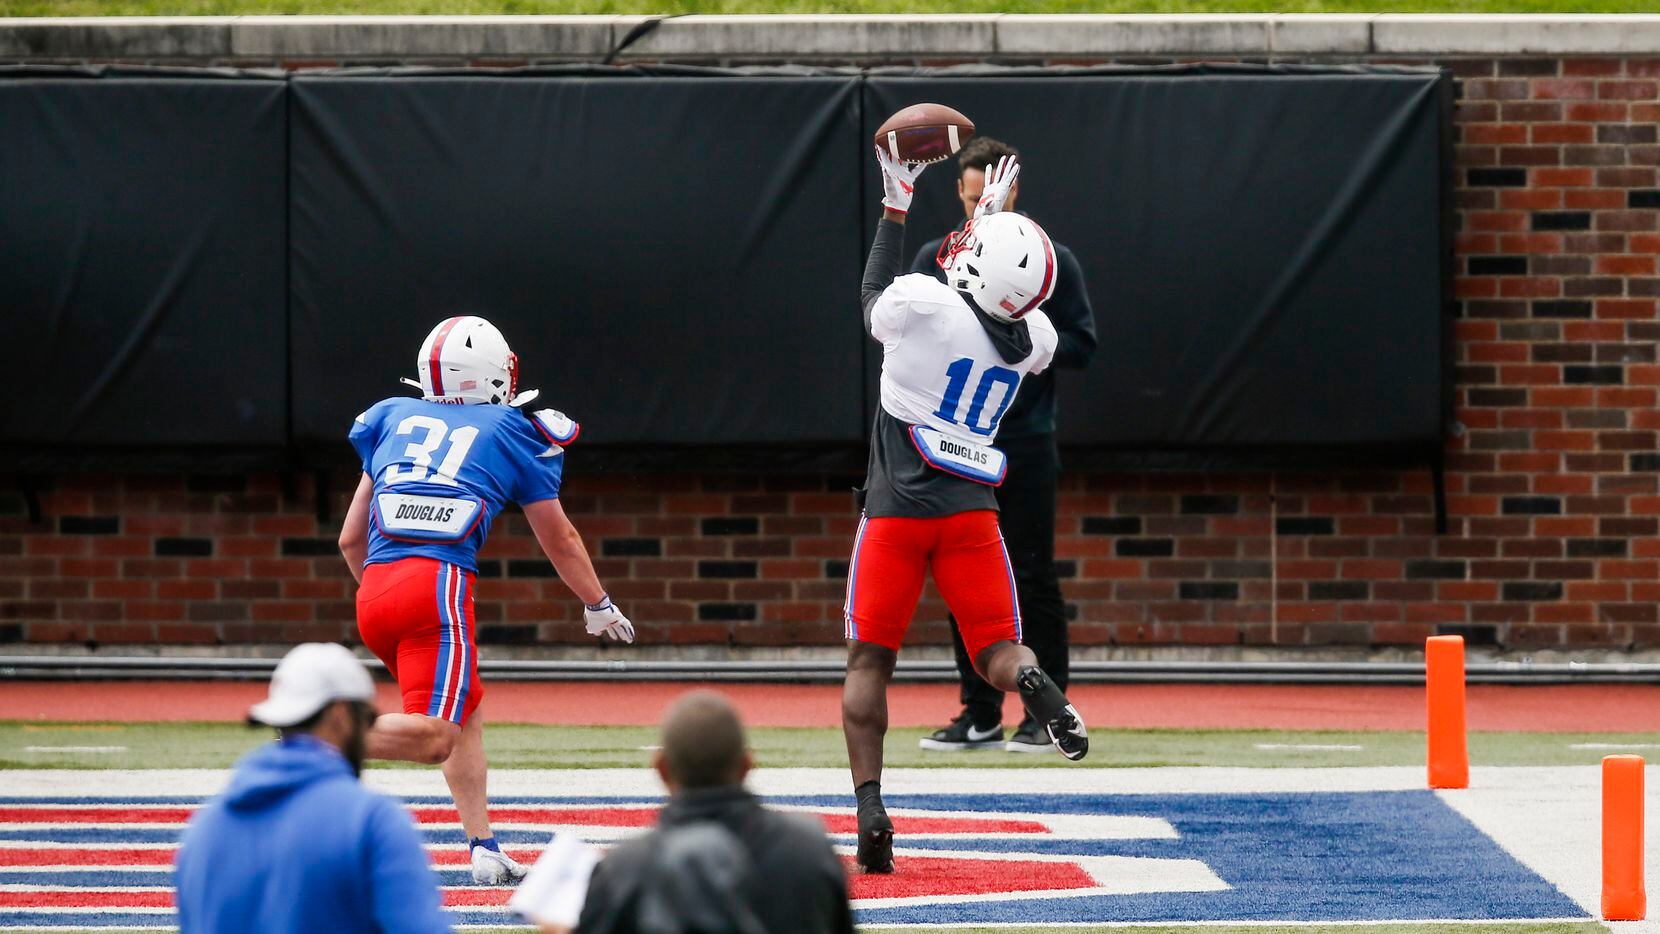 SMU wide receiver Dylan Goffney (10) catches a pass as SMU safety Tripp McAda (31) defends during practice at Gerald Ford Stadium, Saturday, April 17, 2021.